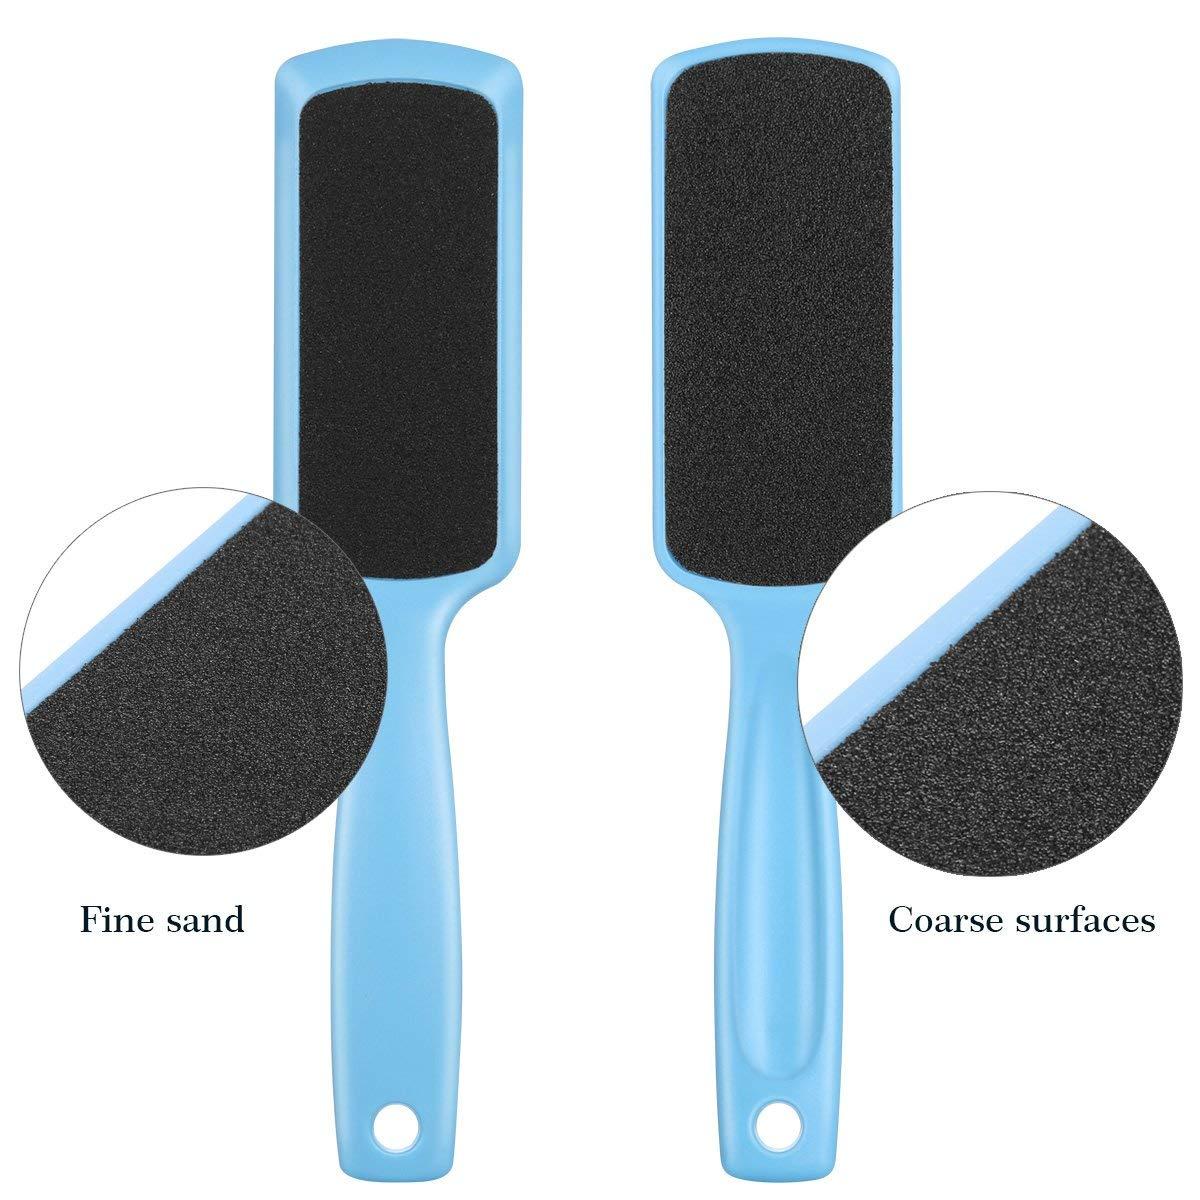 Foot Rasp,3PCS Feet Scrubber Dead Skin,Callus Remover for Feet,Pedicure  Tools & Foot Scrubber Can be Used on both wet and dry feet, Surgical grade